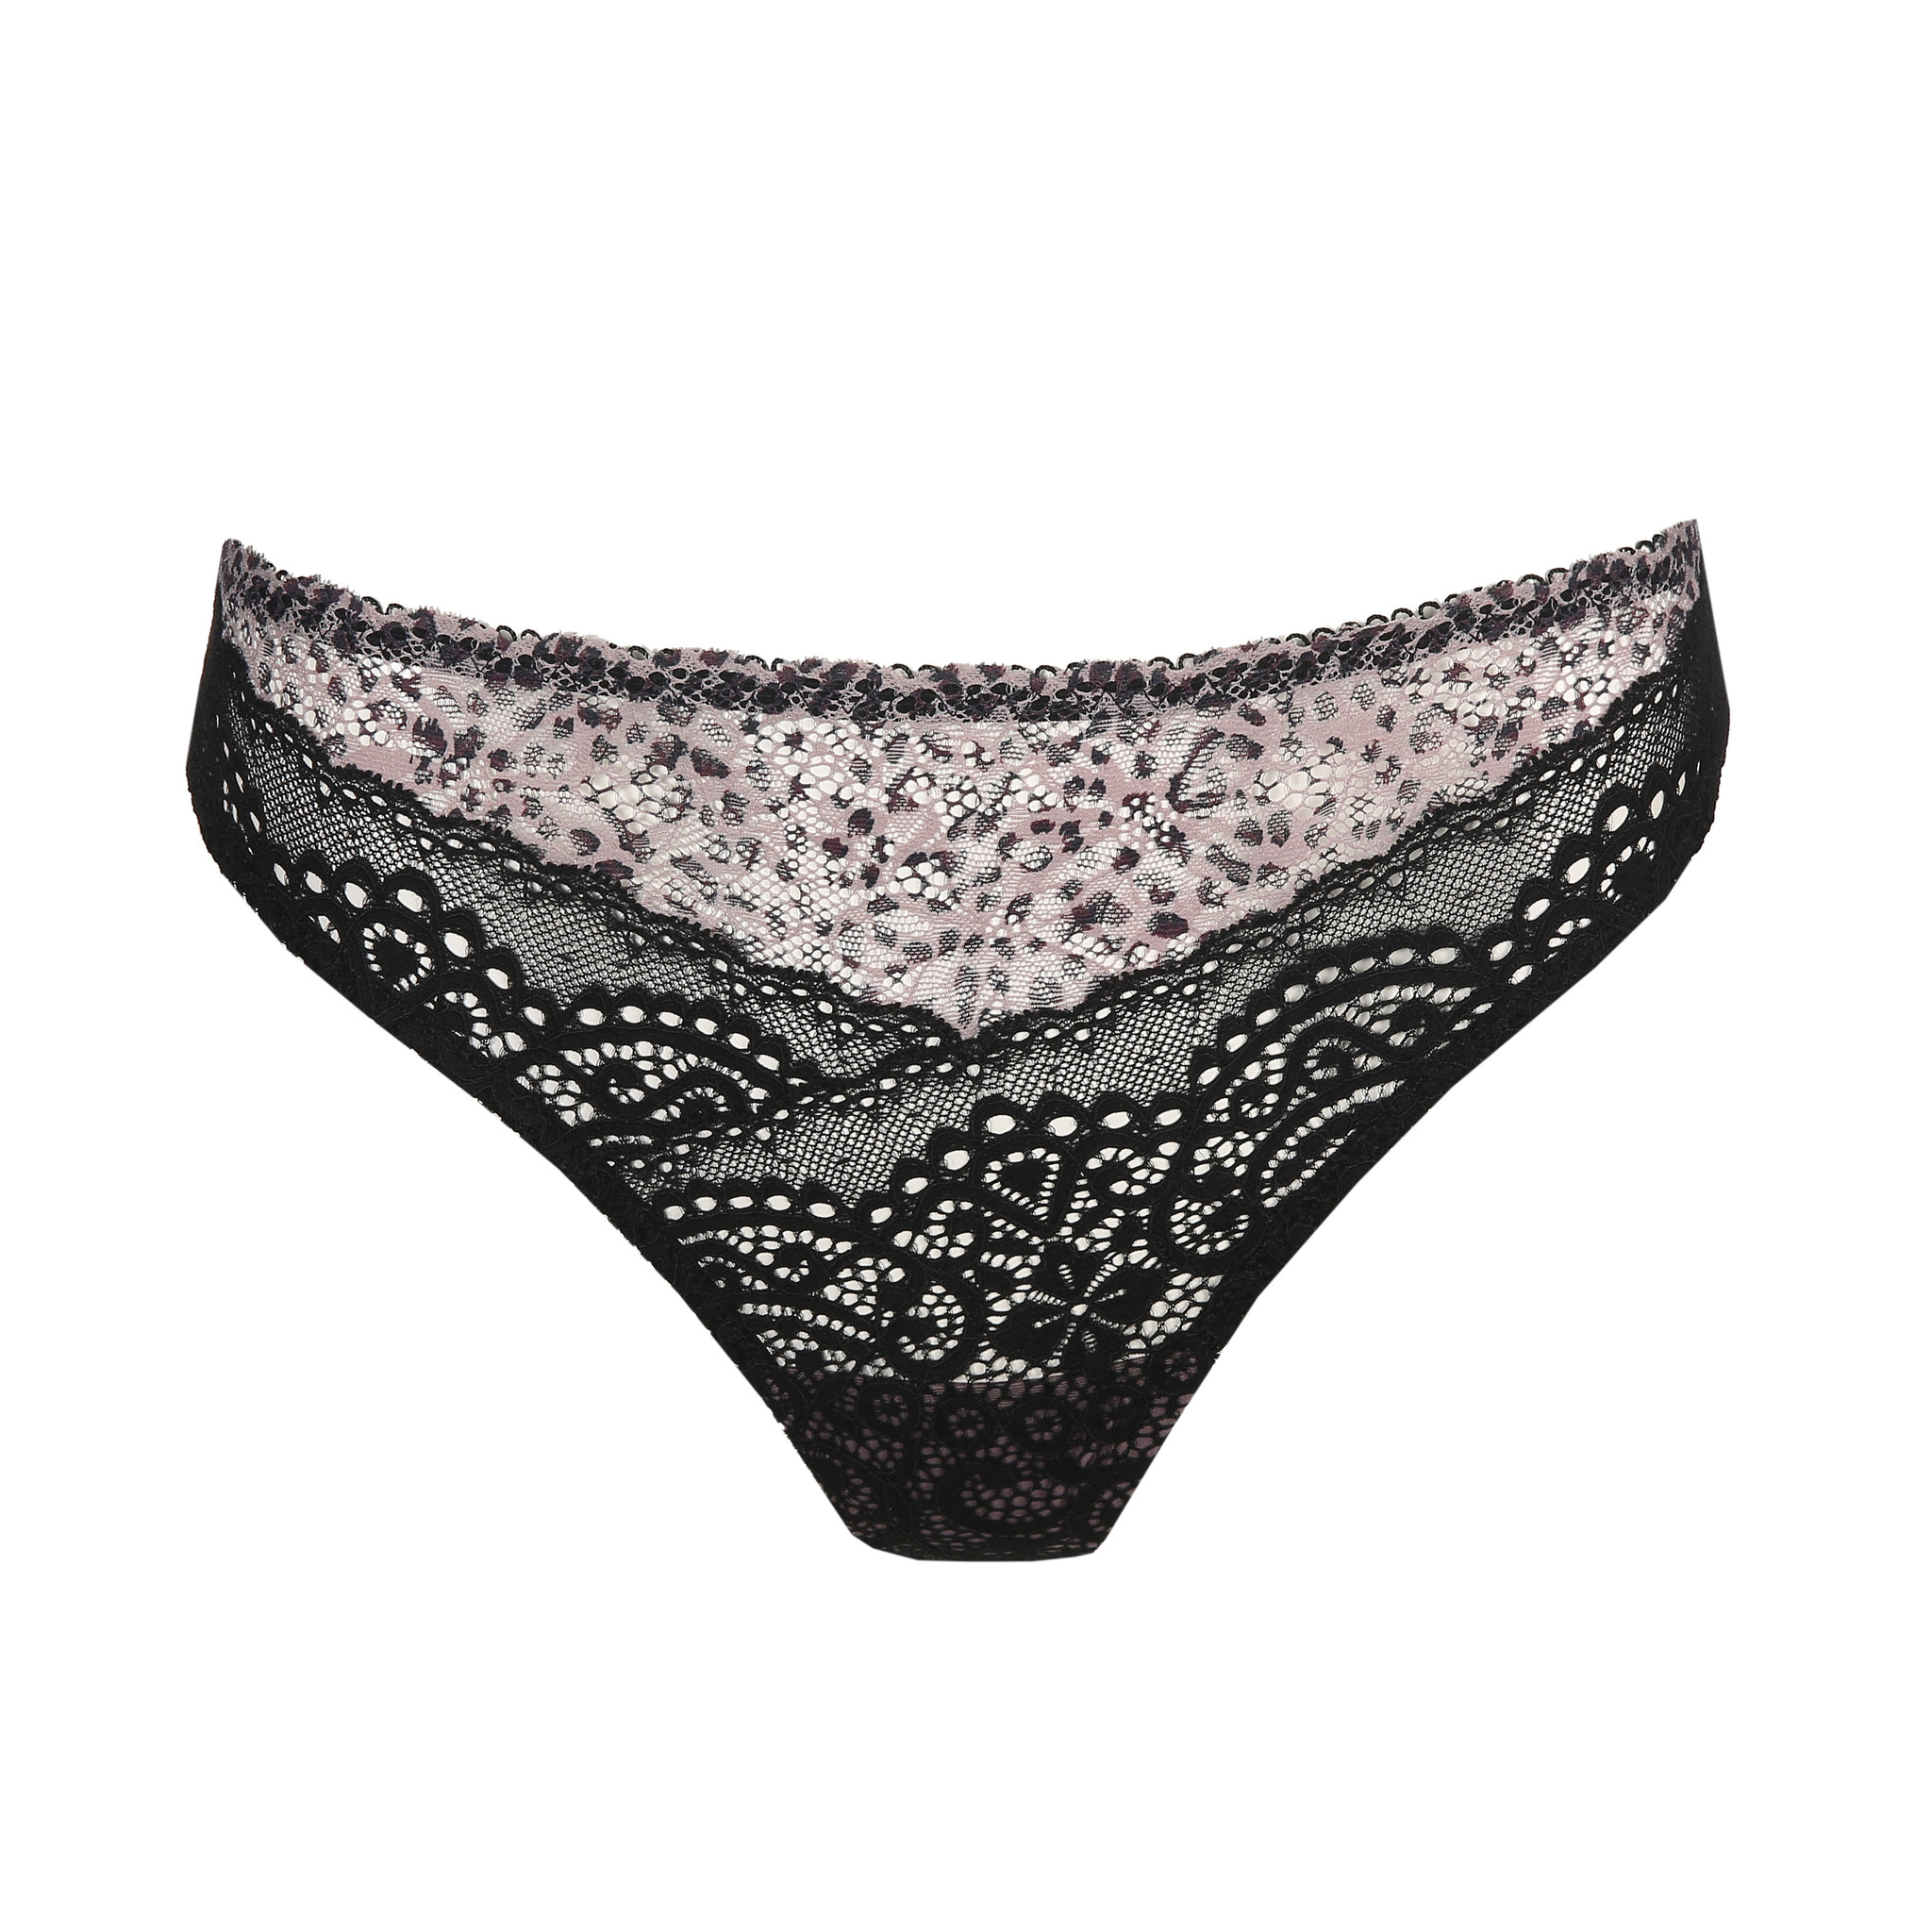 Coely Thong Panty Smokey 0602630 - Lace & Day